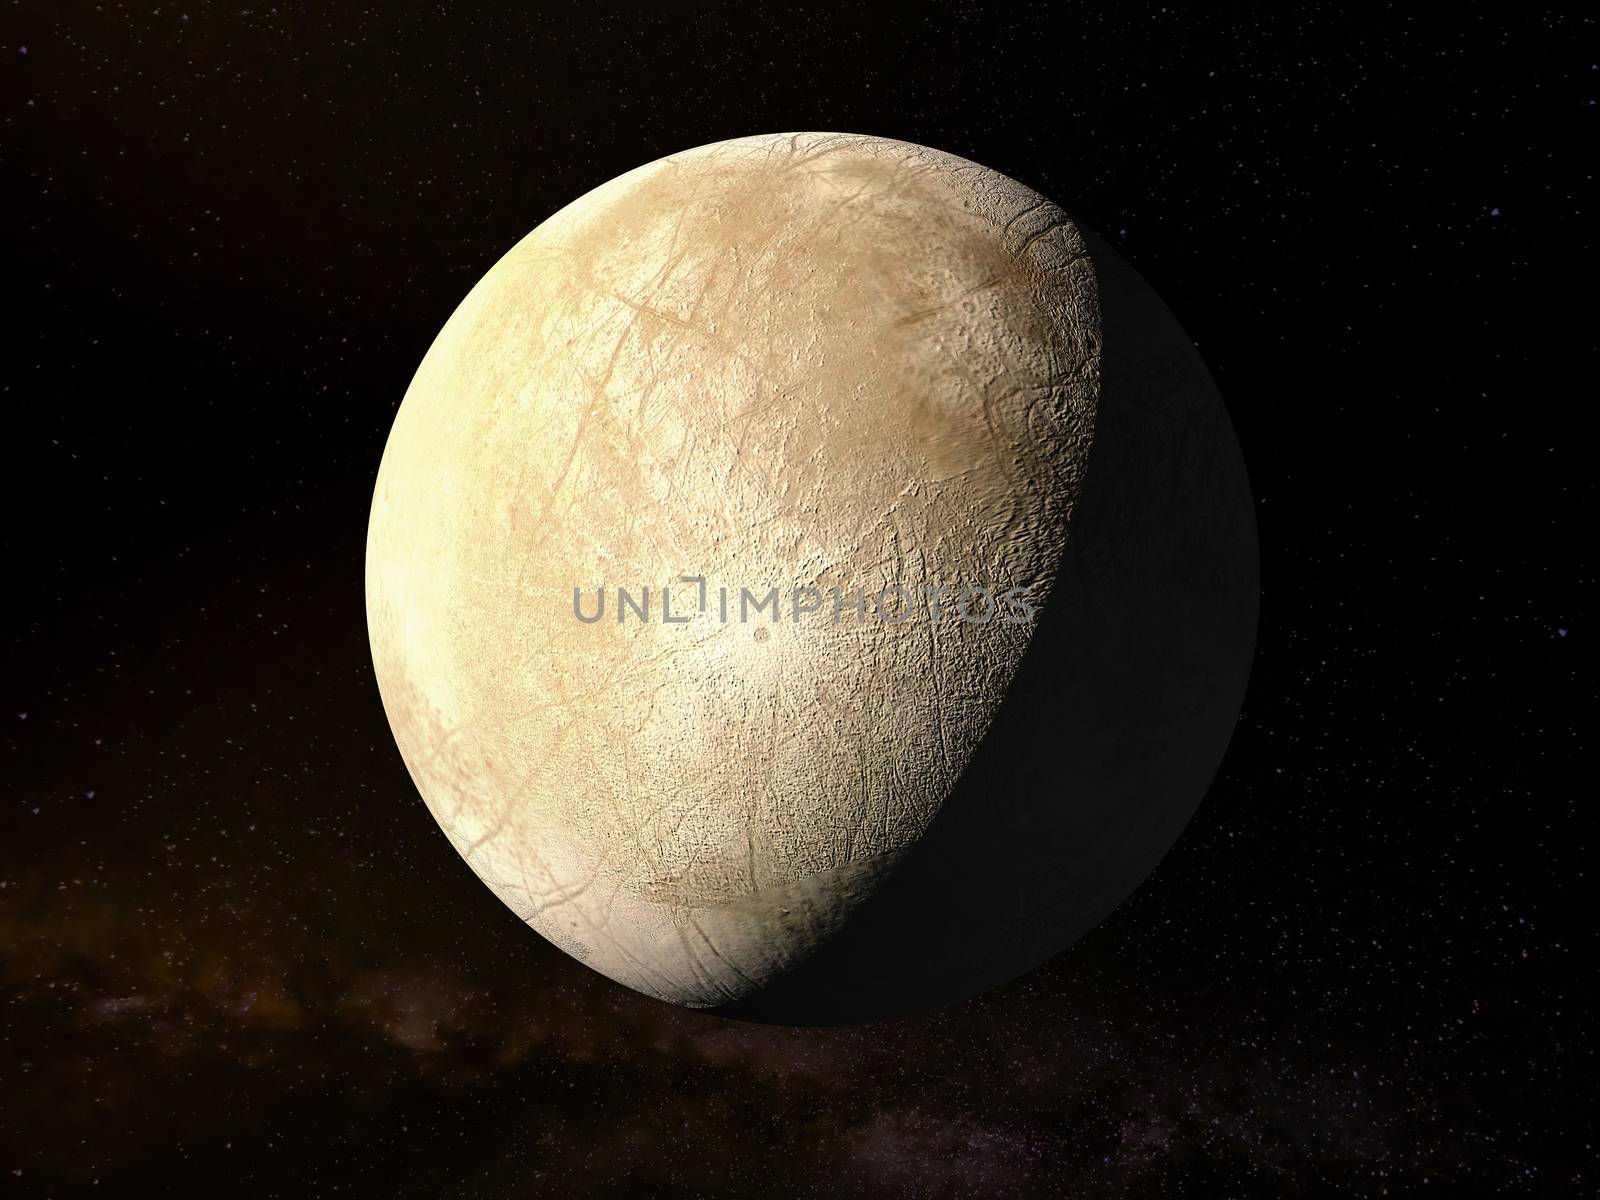 Jupiter moon Europe - High resolution 3D Rendering images presents planets of the solar system. by tussik